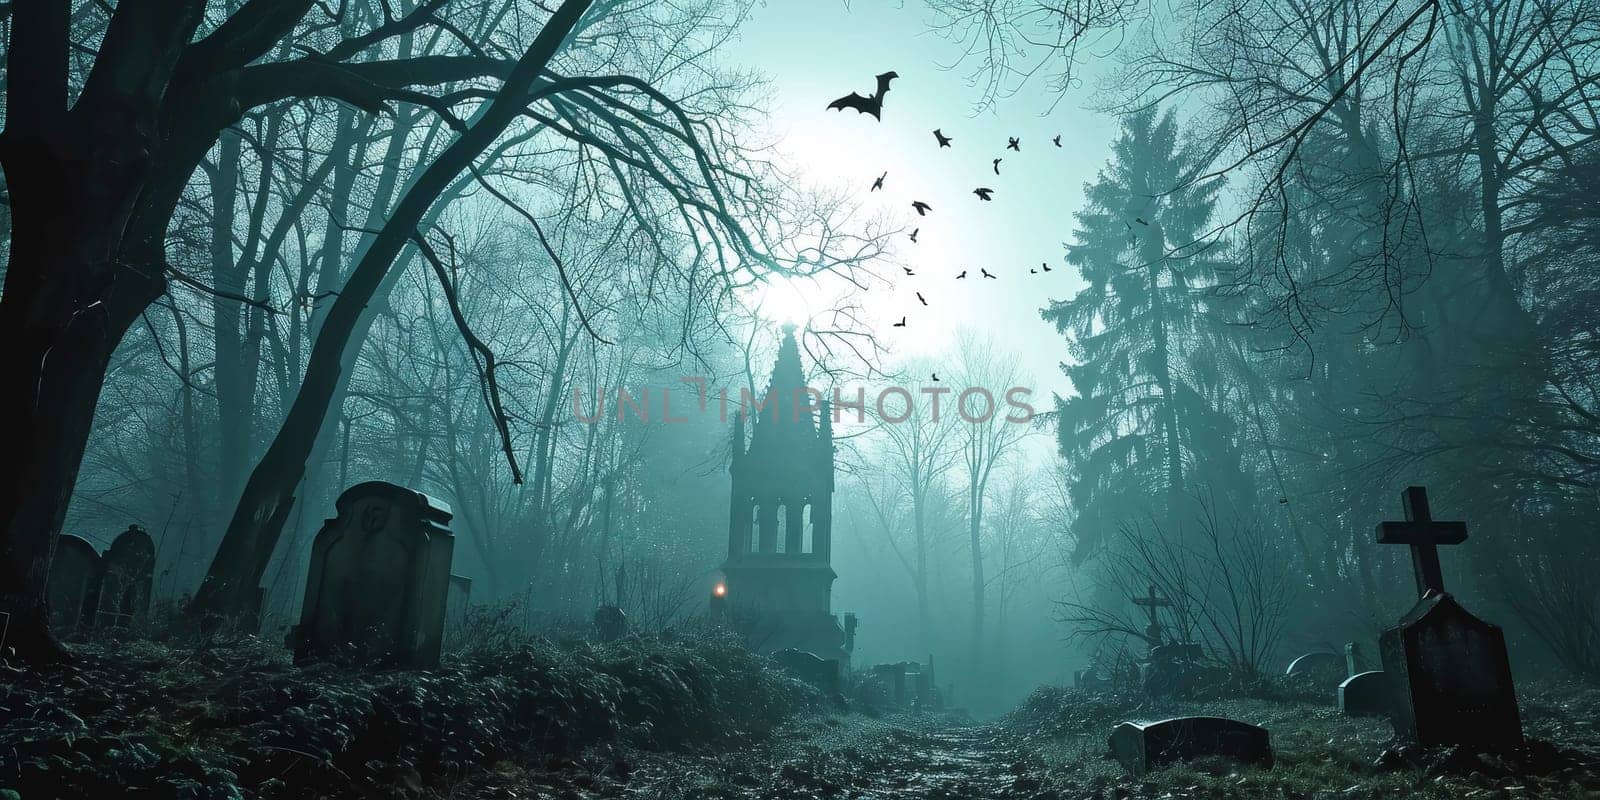 Mystical Cemetery in Foggy Forest with Bats by andreyz